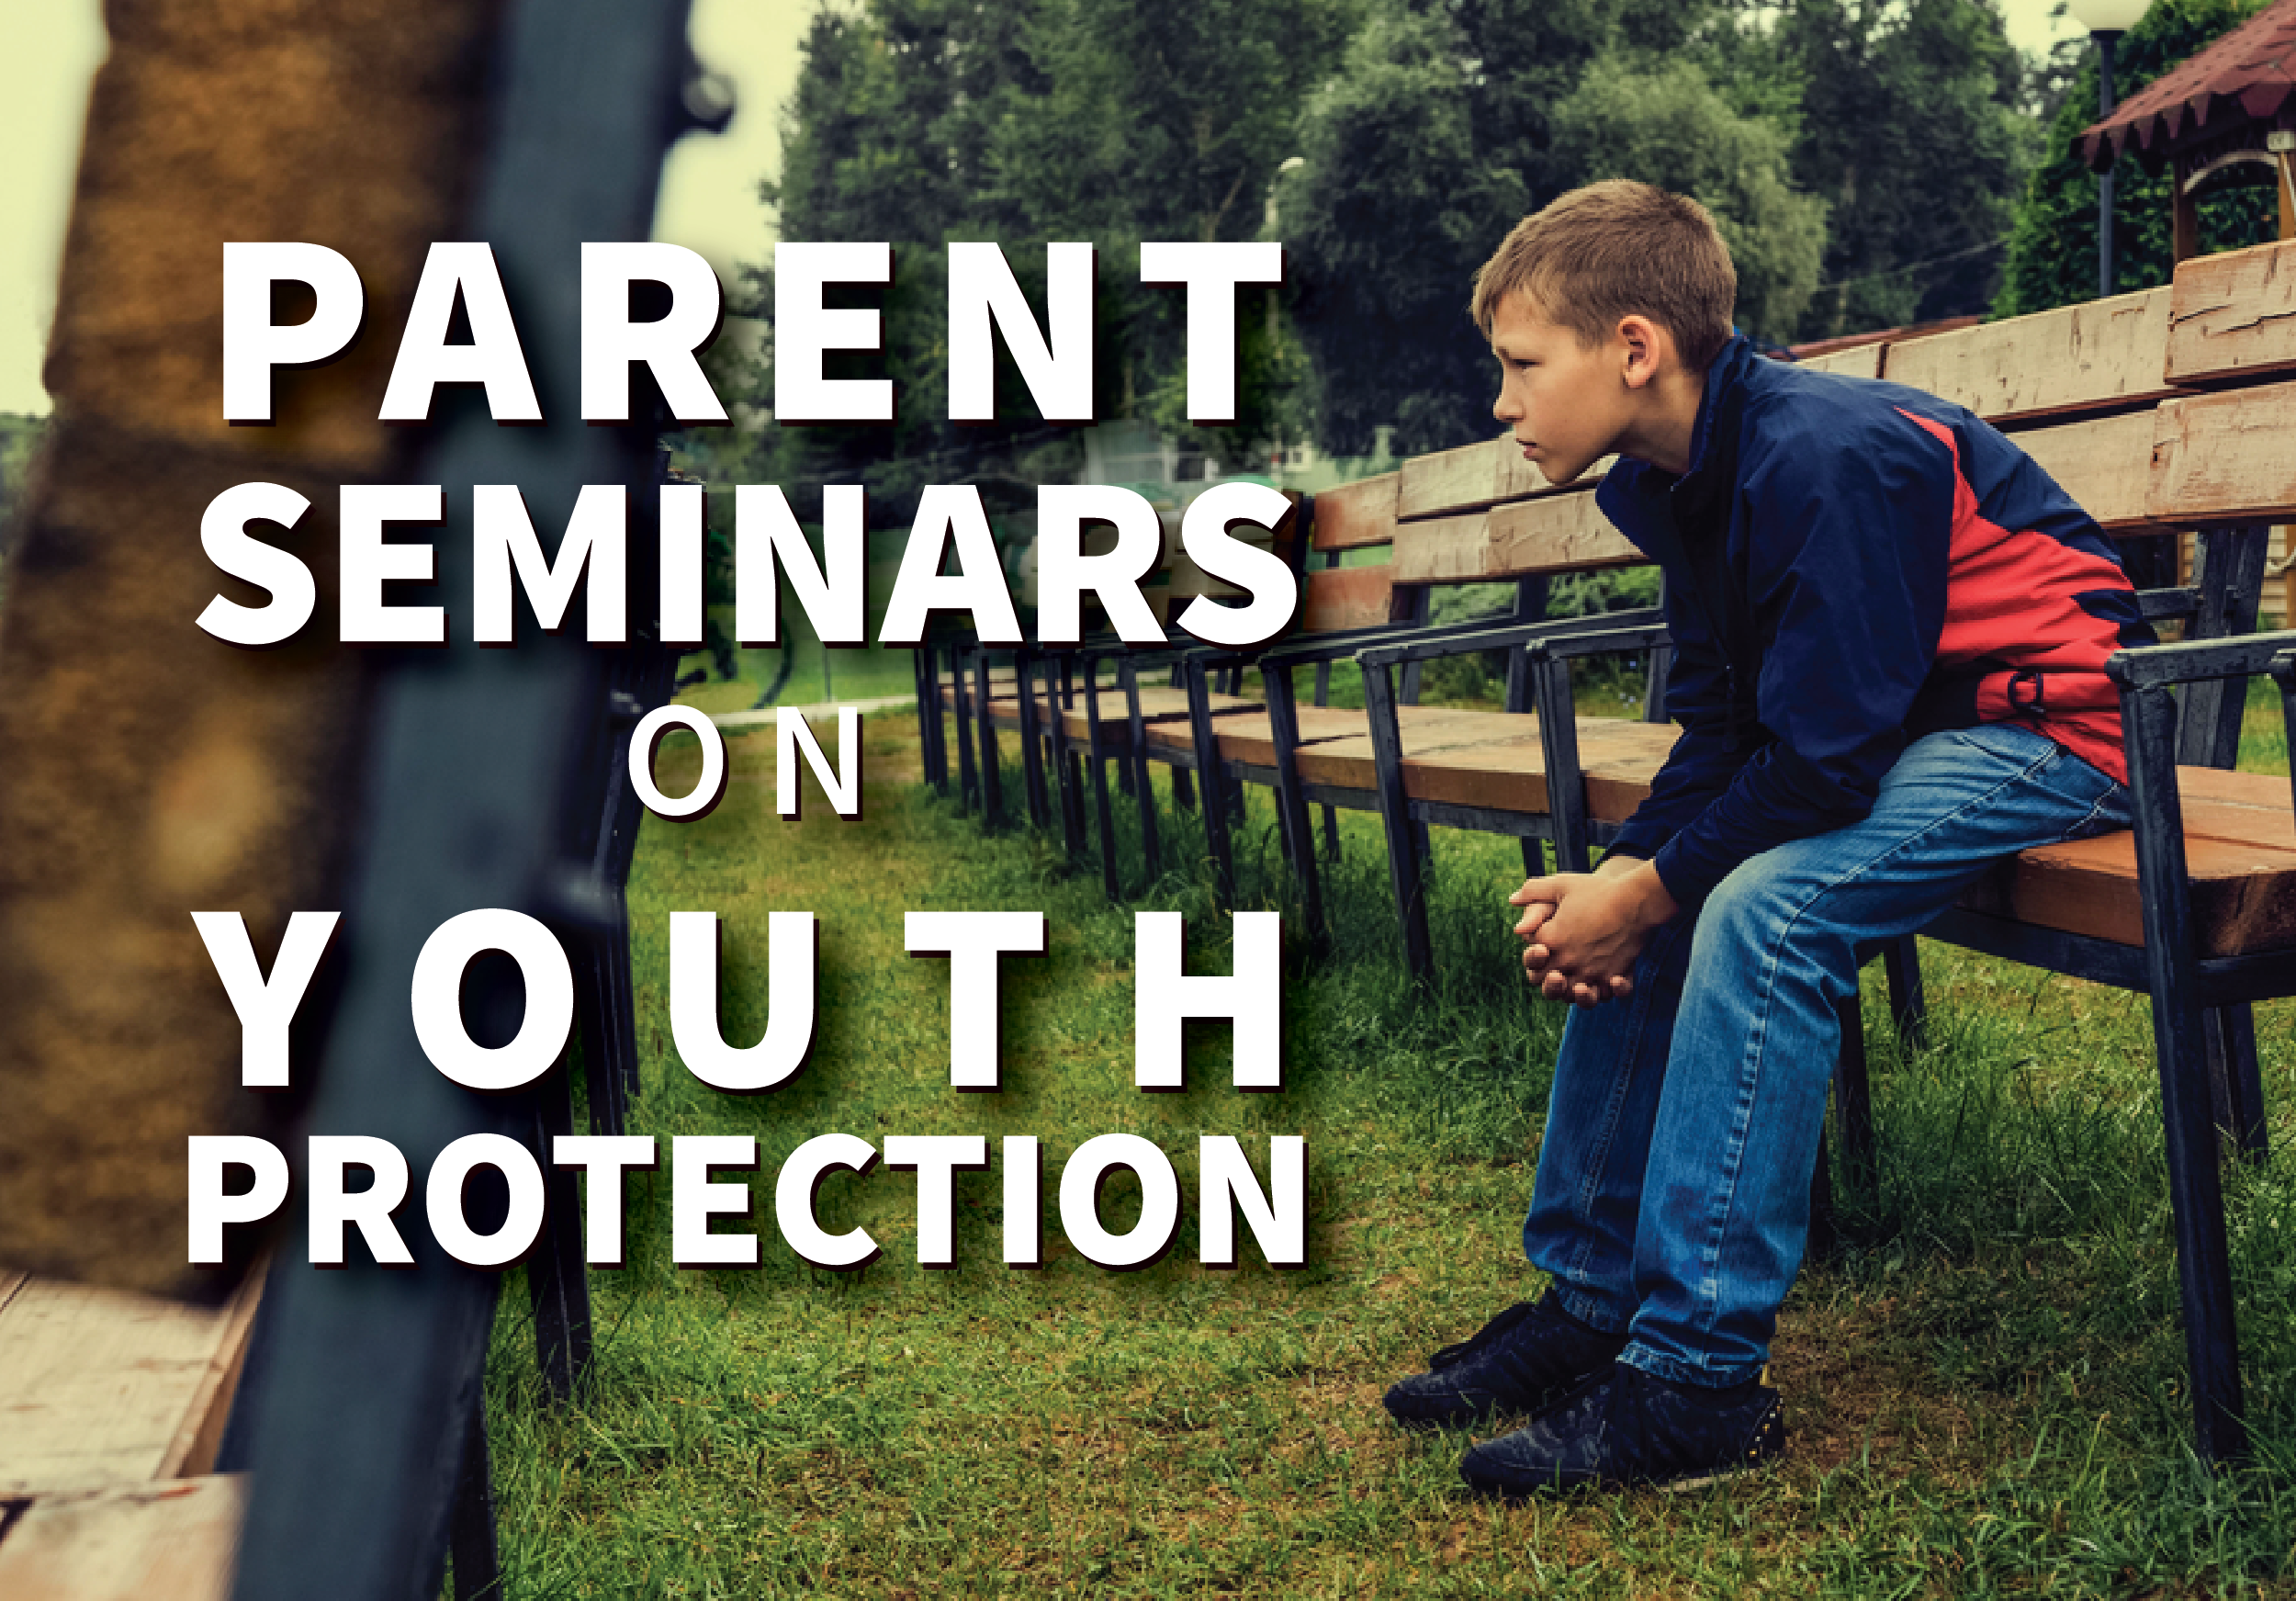 Parent seminars on youth protection